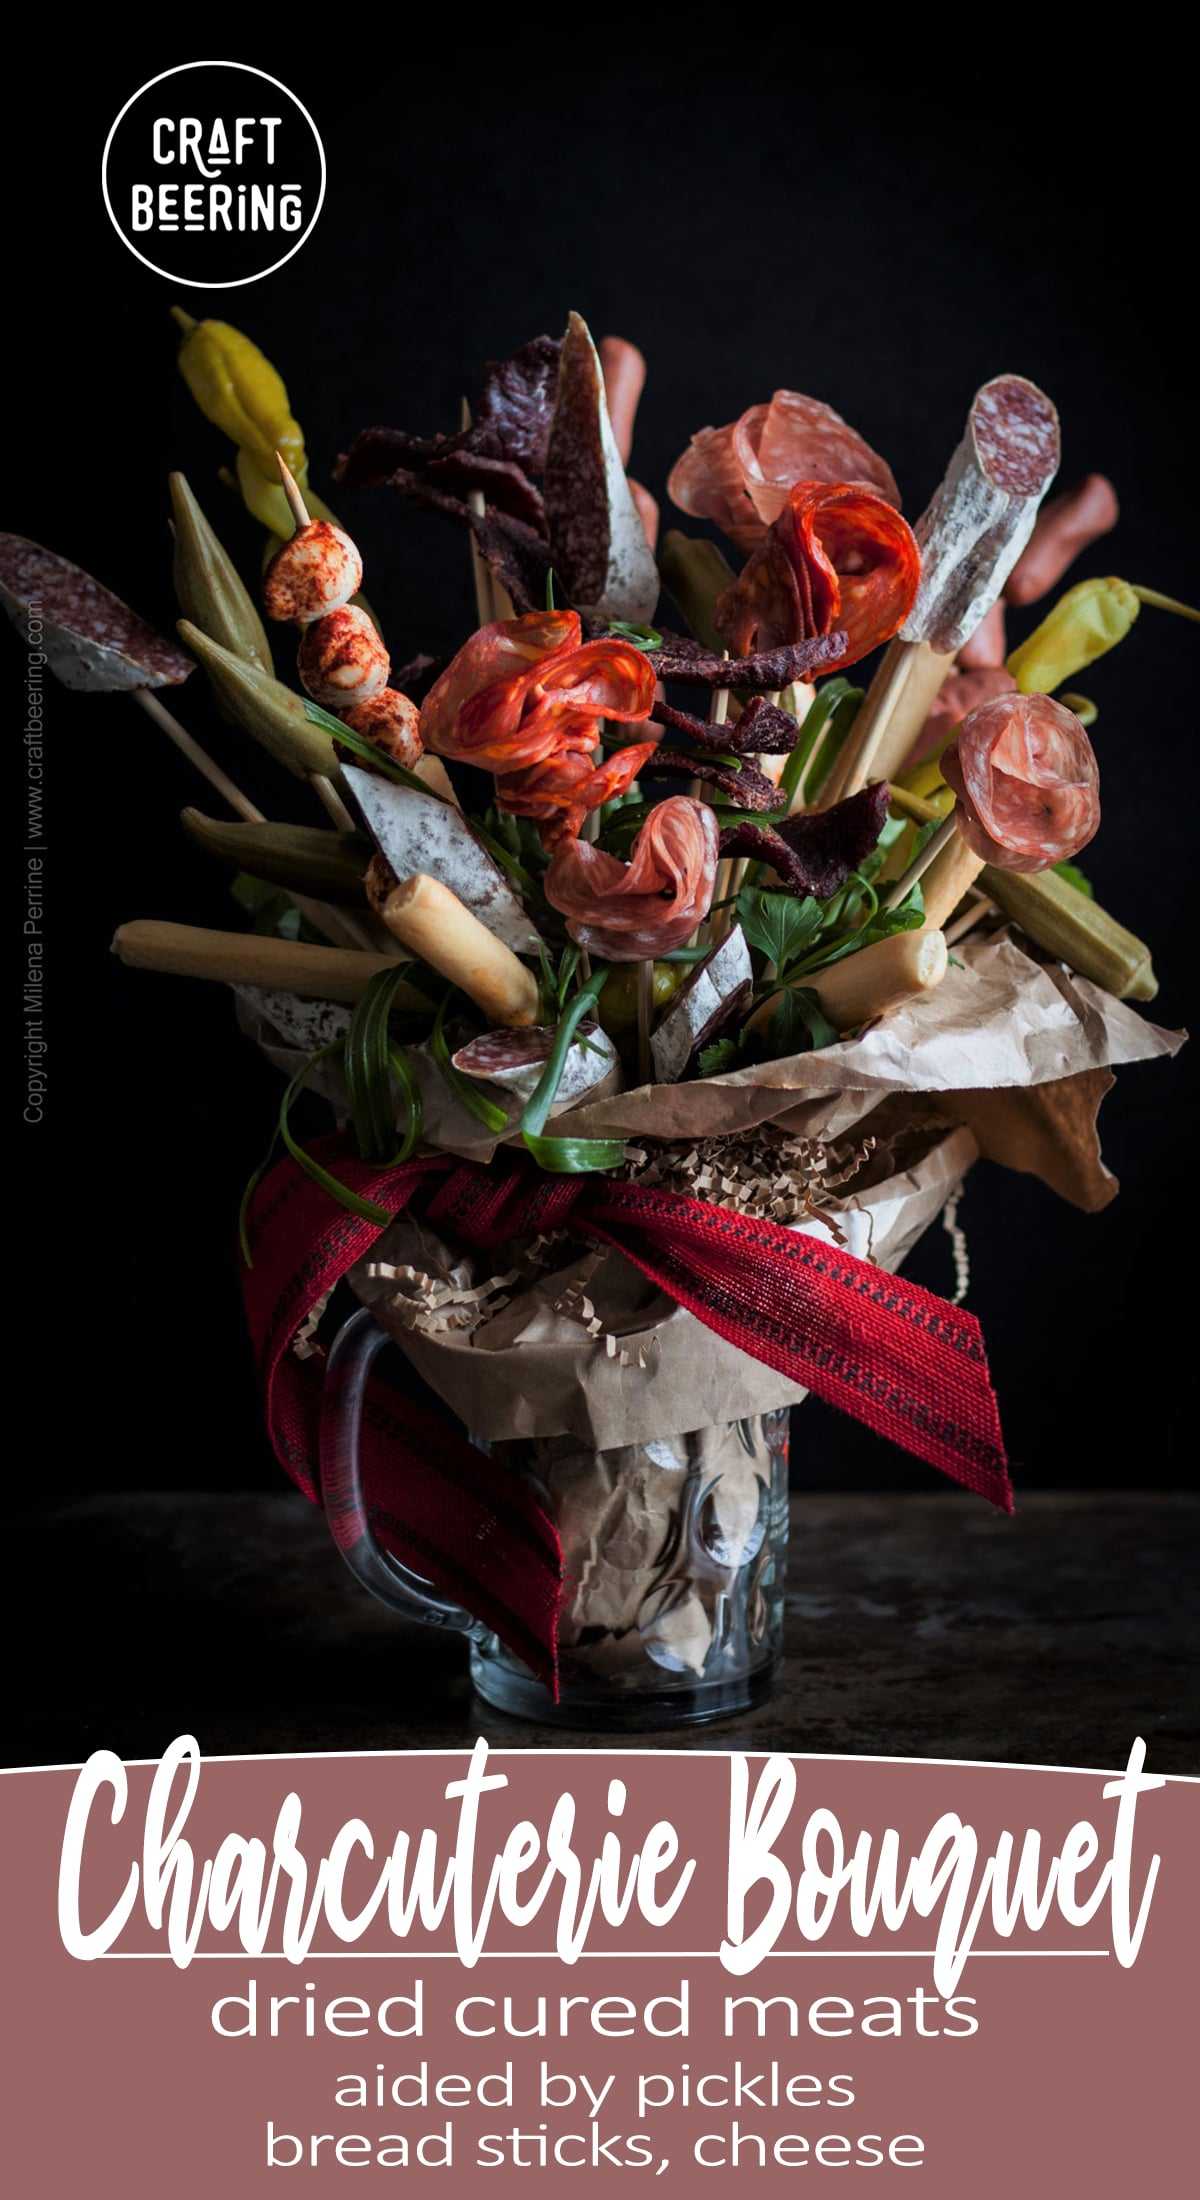 Charcuterie Bouquet. Salami flowers:) and bread sticks for your man. Or woman. A beer lover's dream gift. #beerlovergift #charcuteriebouquet #salamibouquet #ediblebouquet #manflowers